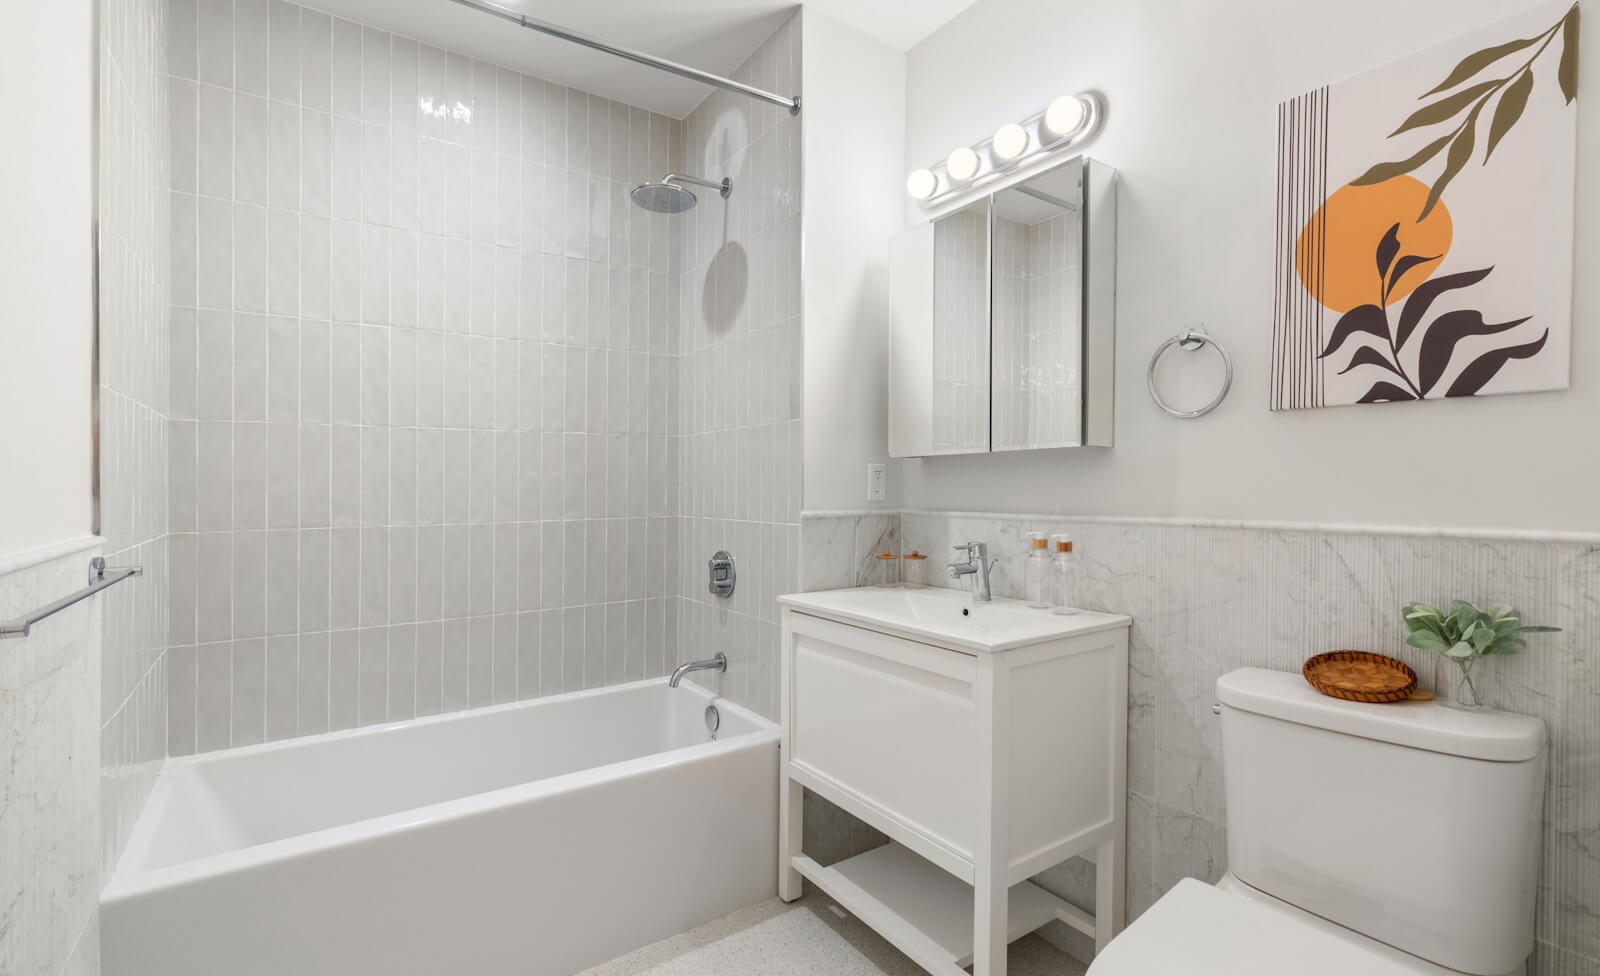 Stylish bathroom at a condominium in Harlem Hamilton Heights at 463 West 142nd Street in NYC.